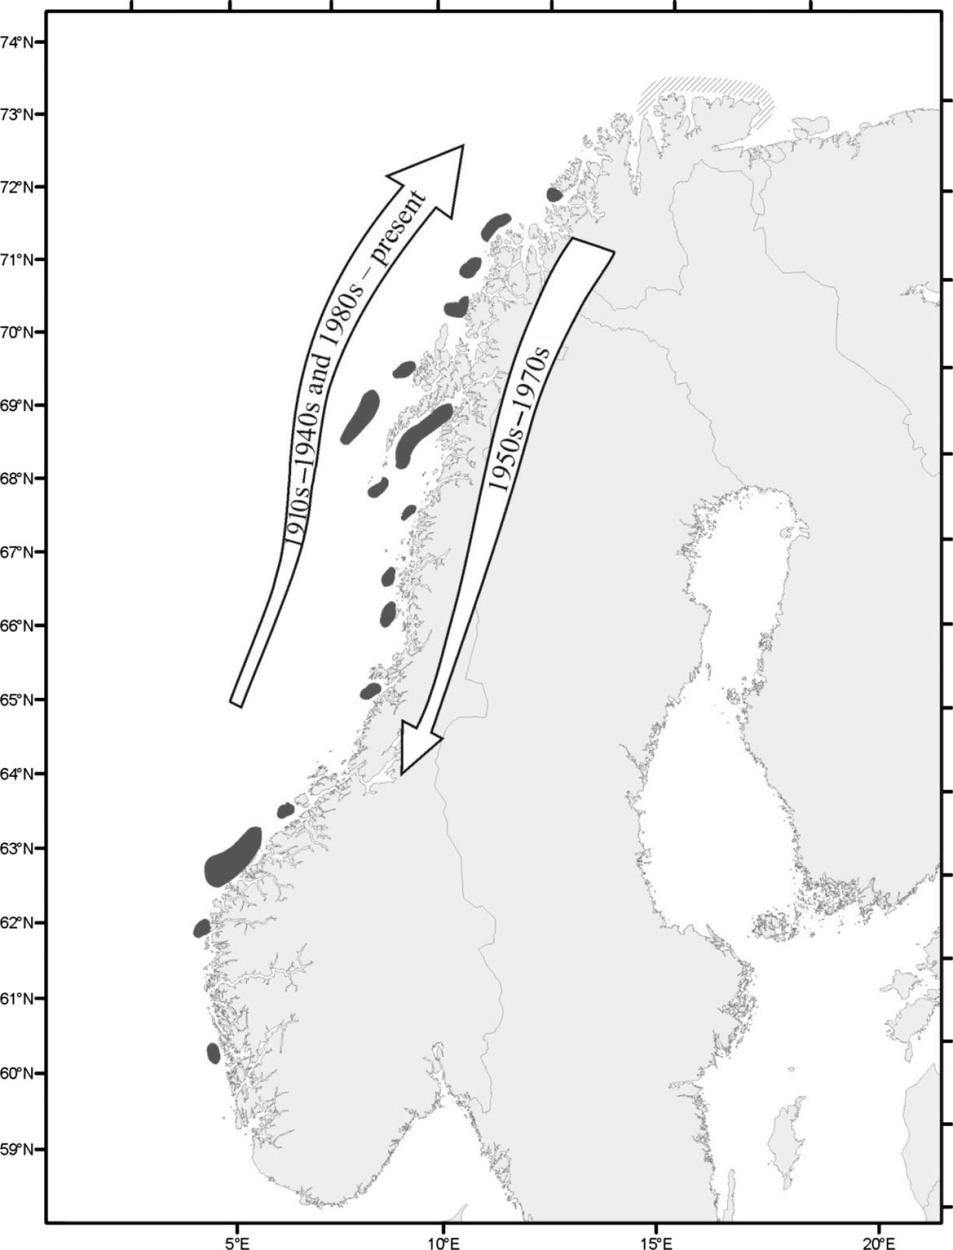 Variations in spawning time and place Northeast Arctic cod One way to adapt to climate variability/change is to shift spawning location and thereby maintain temperature exposure (Sundby and Nakken